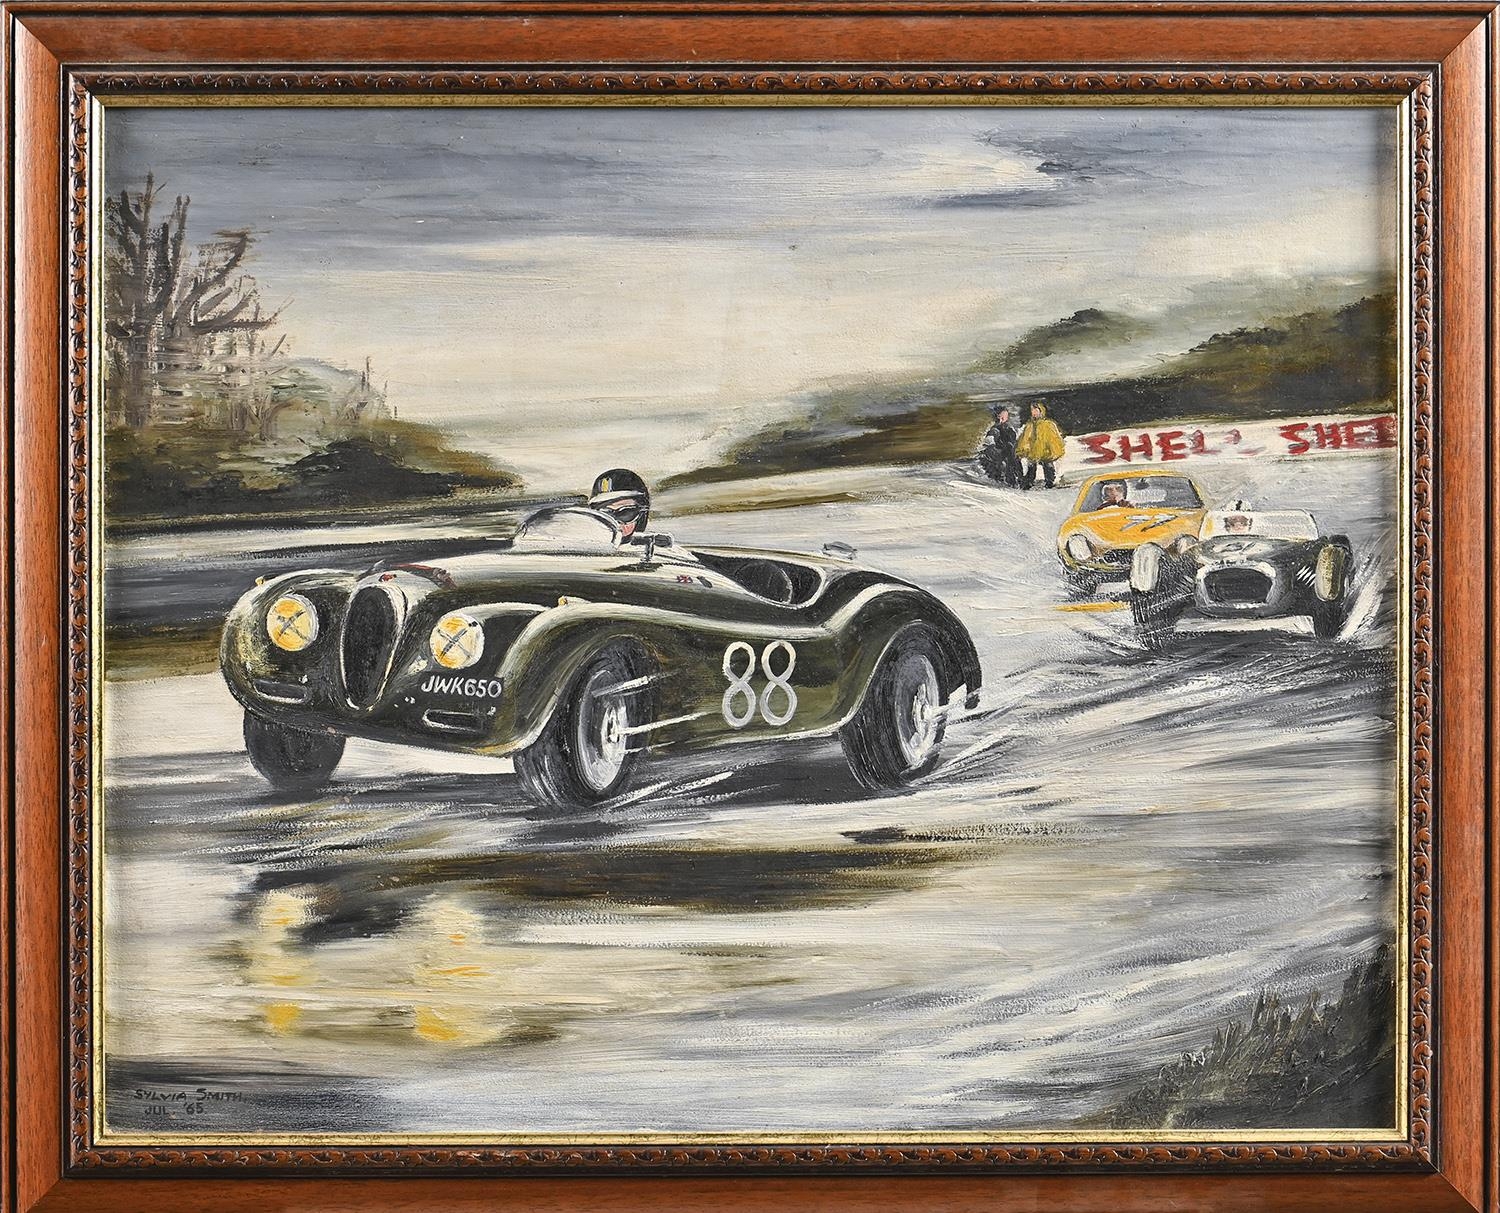 Sylvia Smith, 1965 - Jaguar XK120 in the Lead, signed and dated Jul '65, oil on canvas, 59 x 75cm - Image 2 of 3